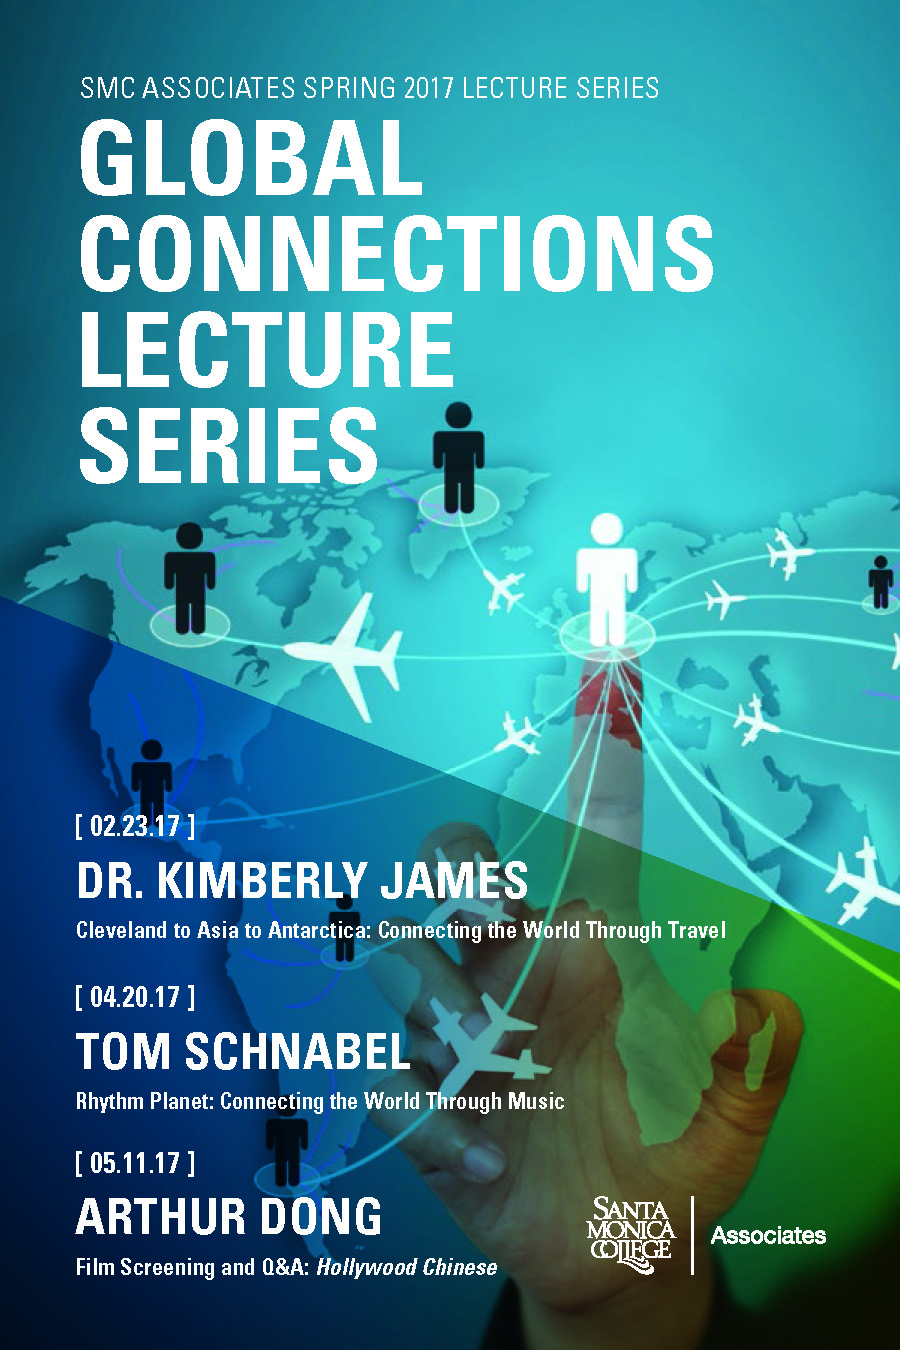 Global Connections Lecture Series